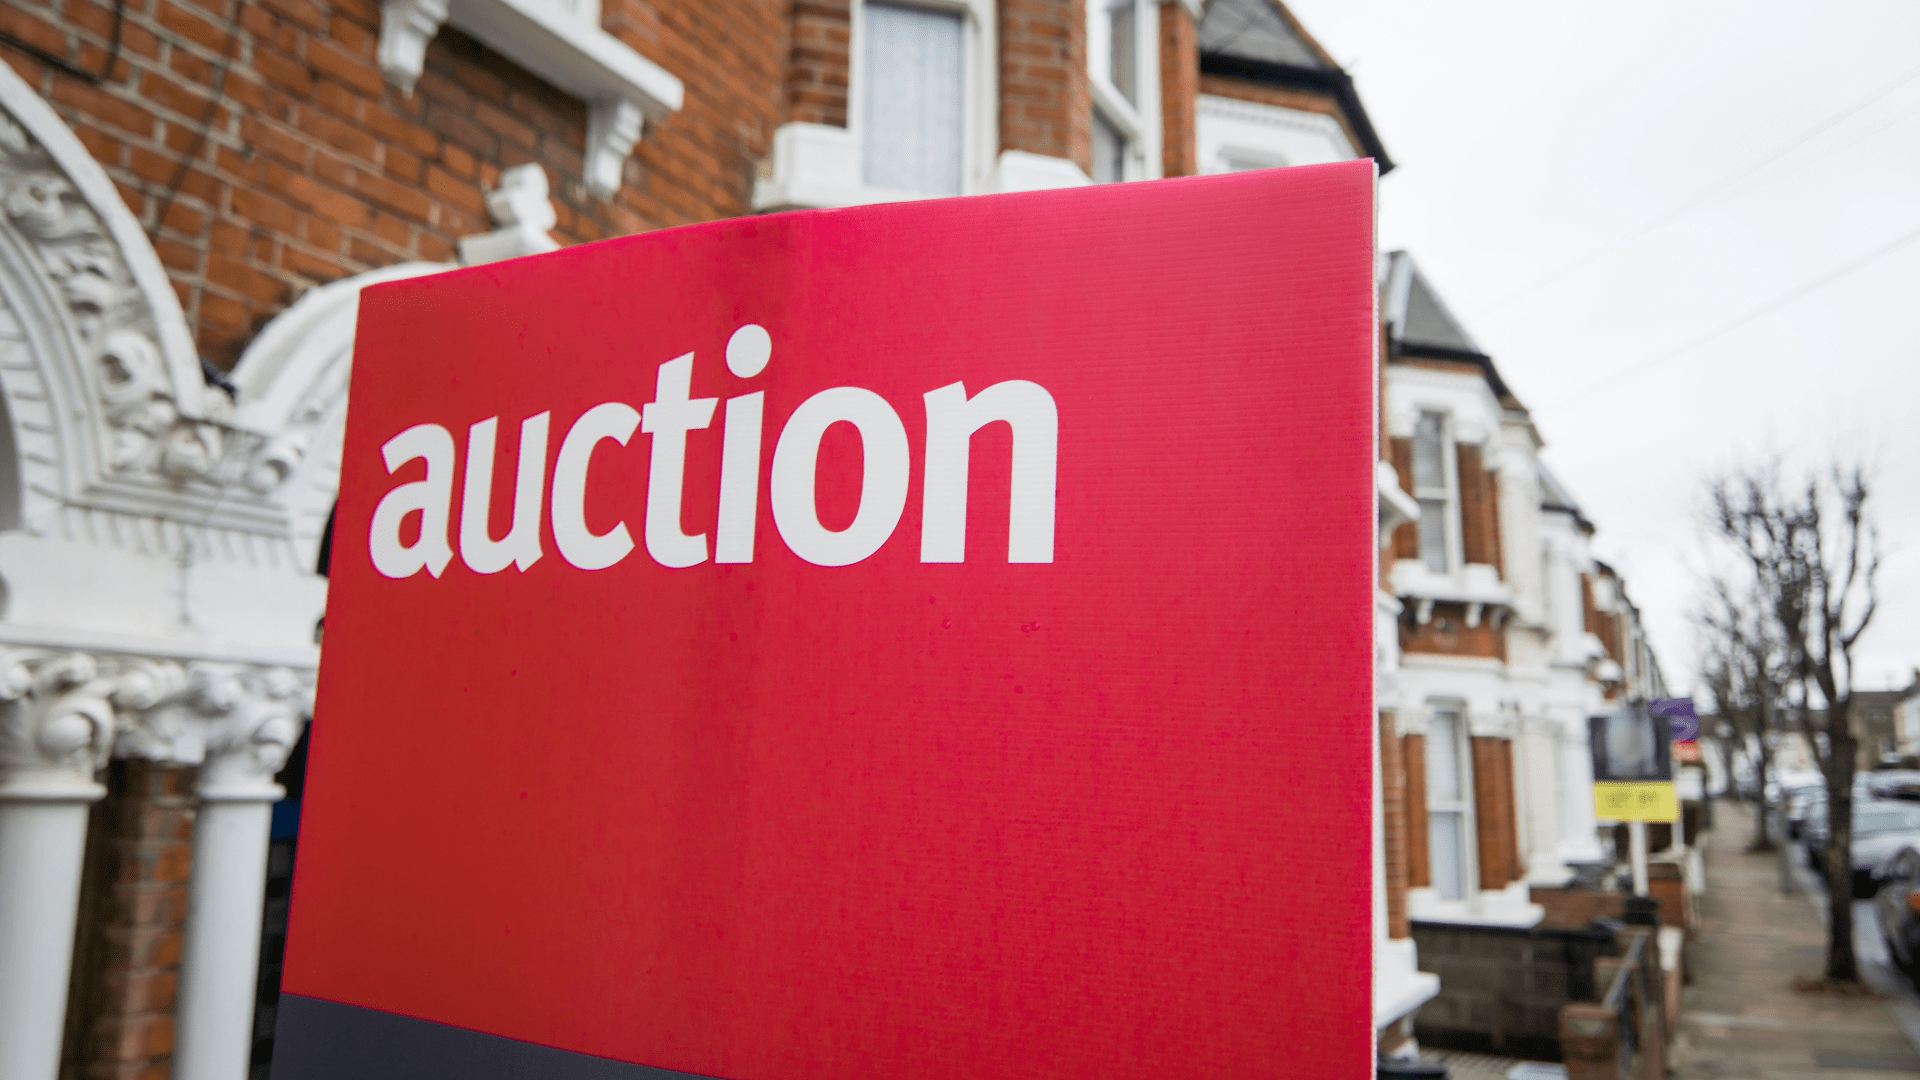 A prominent red "auction" sign in the foreground, with a blurred background of a residential street lined with Victorian-style houses.